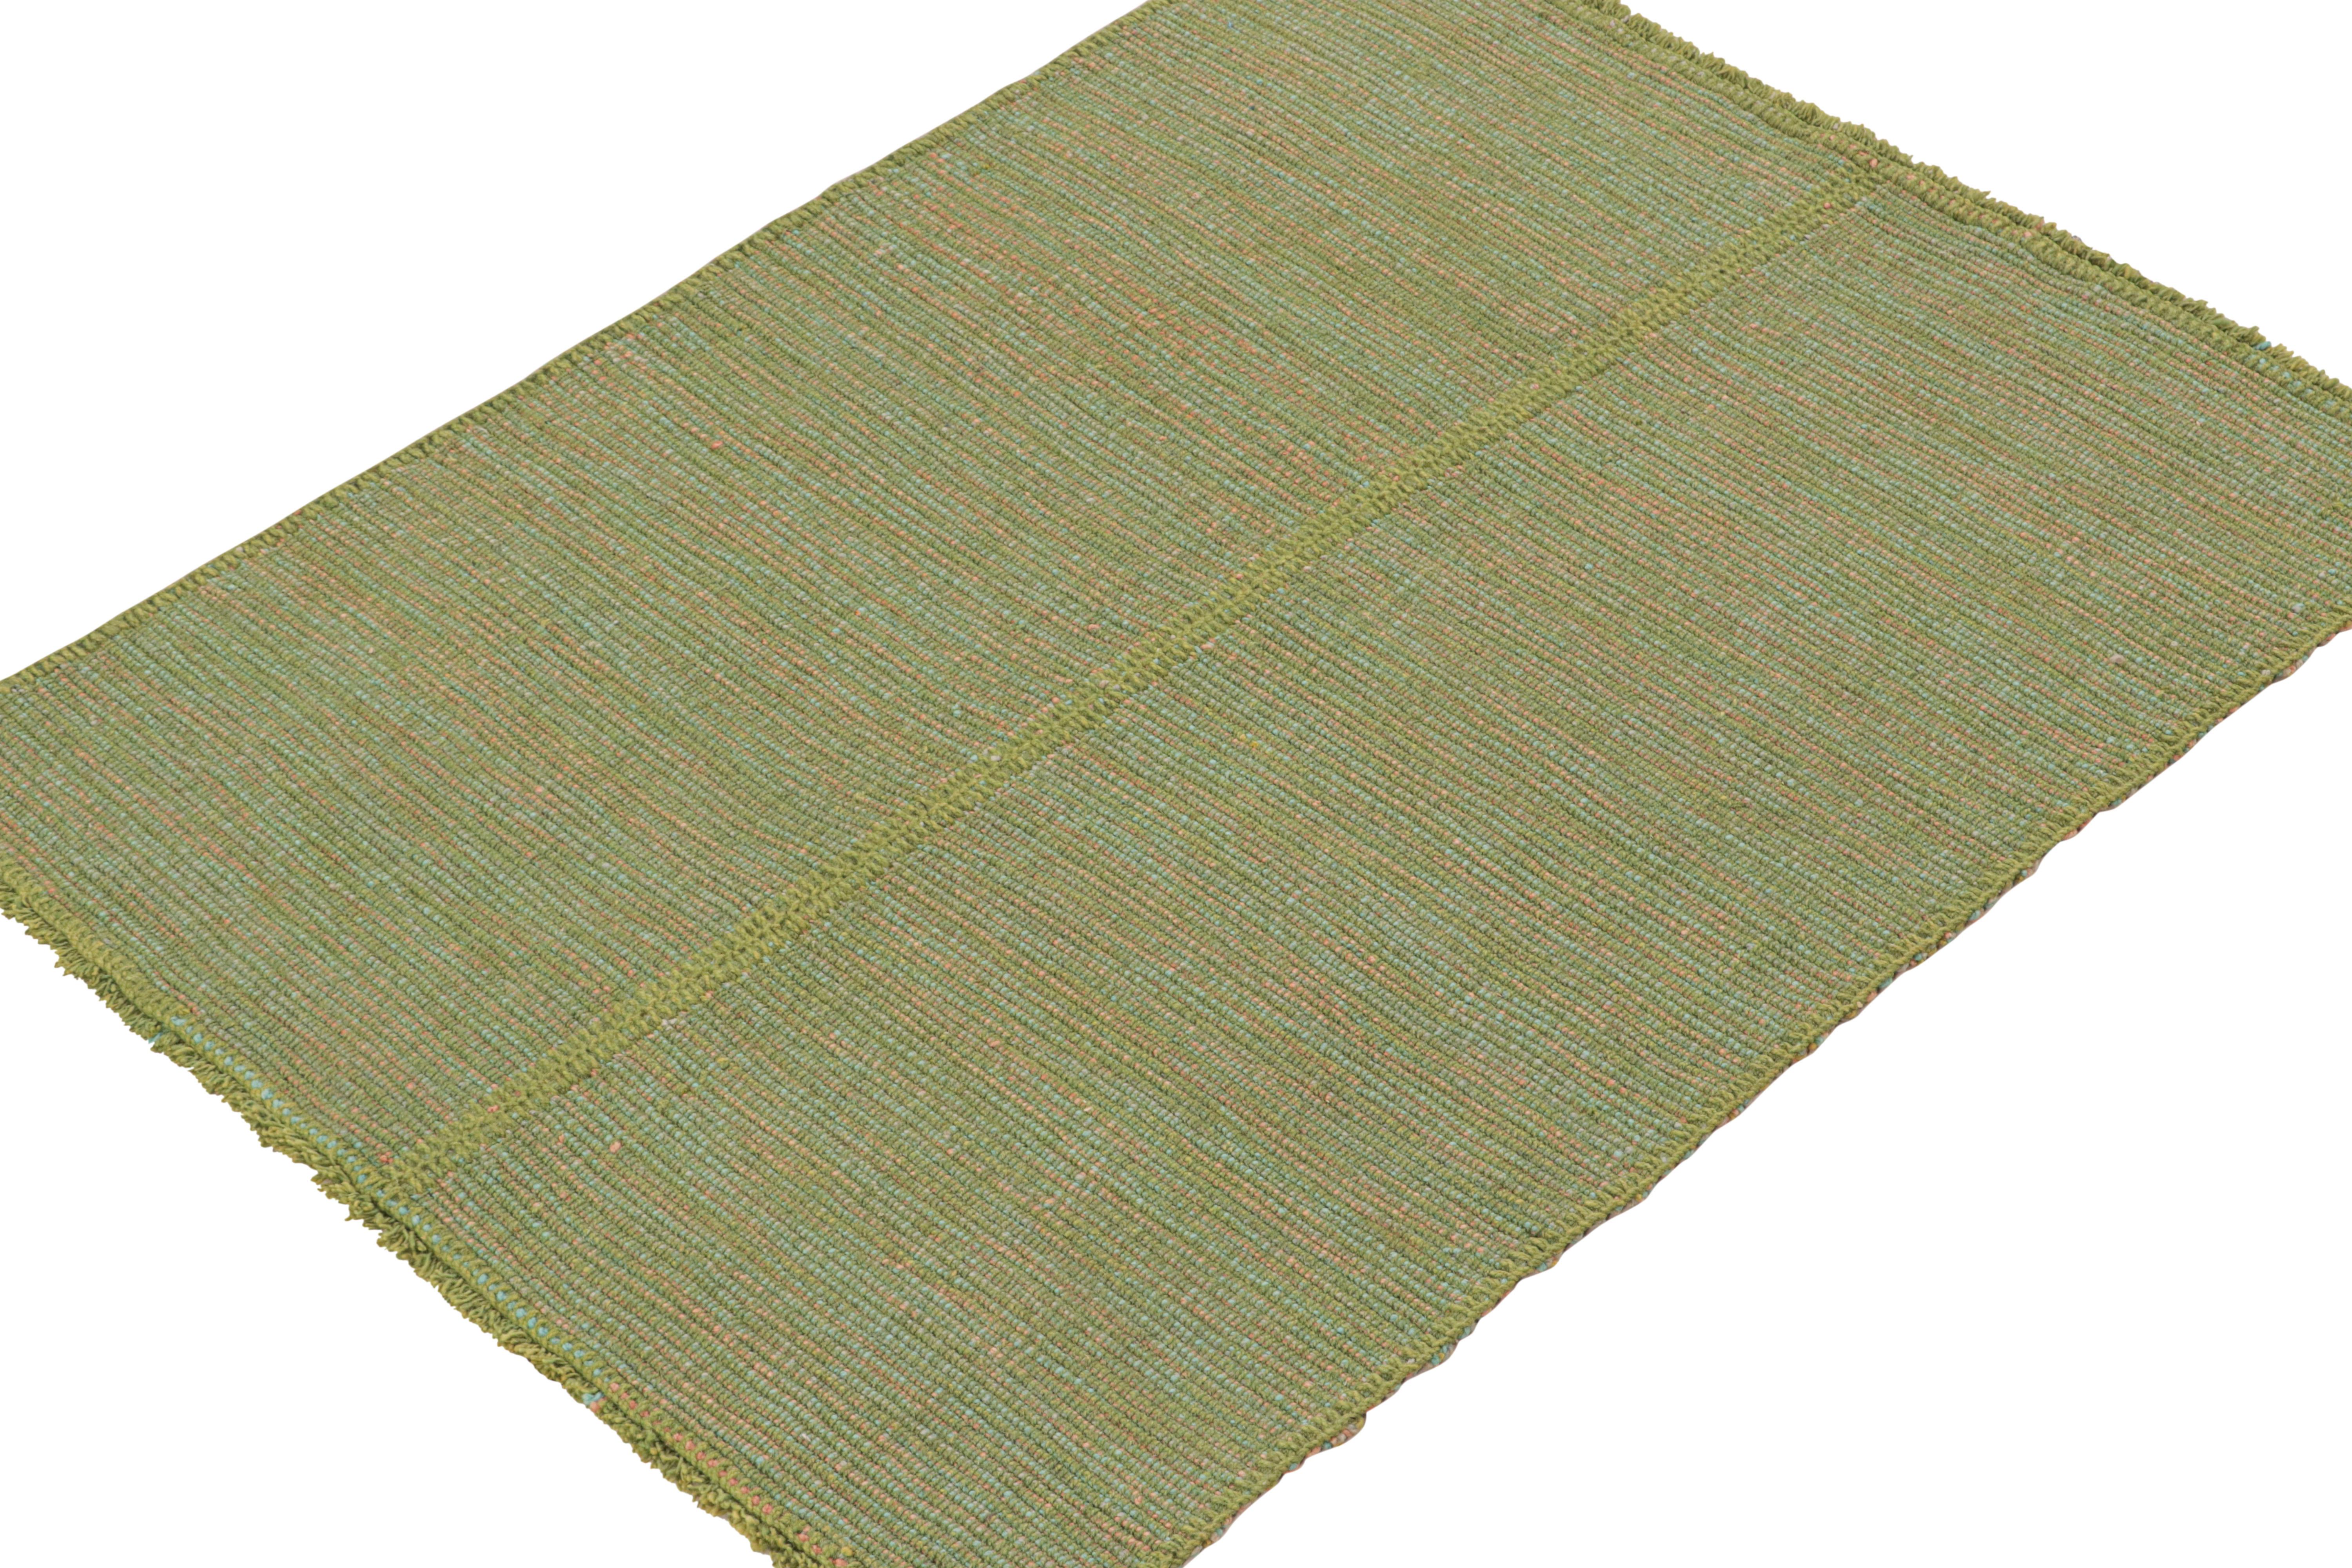 Handwoven in wool, this 4x5 Kilim is from a bold new line of contemporary flatweaves by Rug & Kilim.

Further On the Design:

The “Rez Kilim” connotes a modern take on classic panel weaving. This edition enjoys chartreuse green with teal and pink